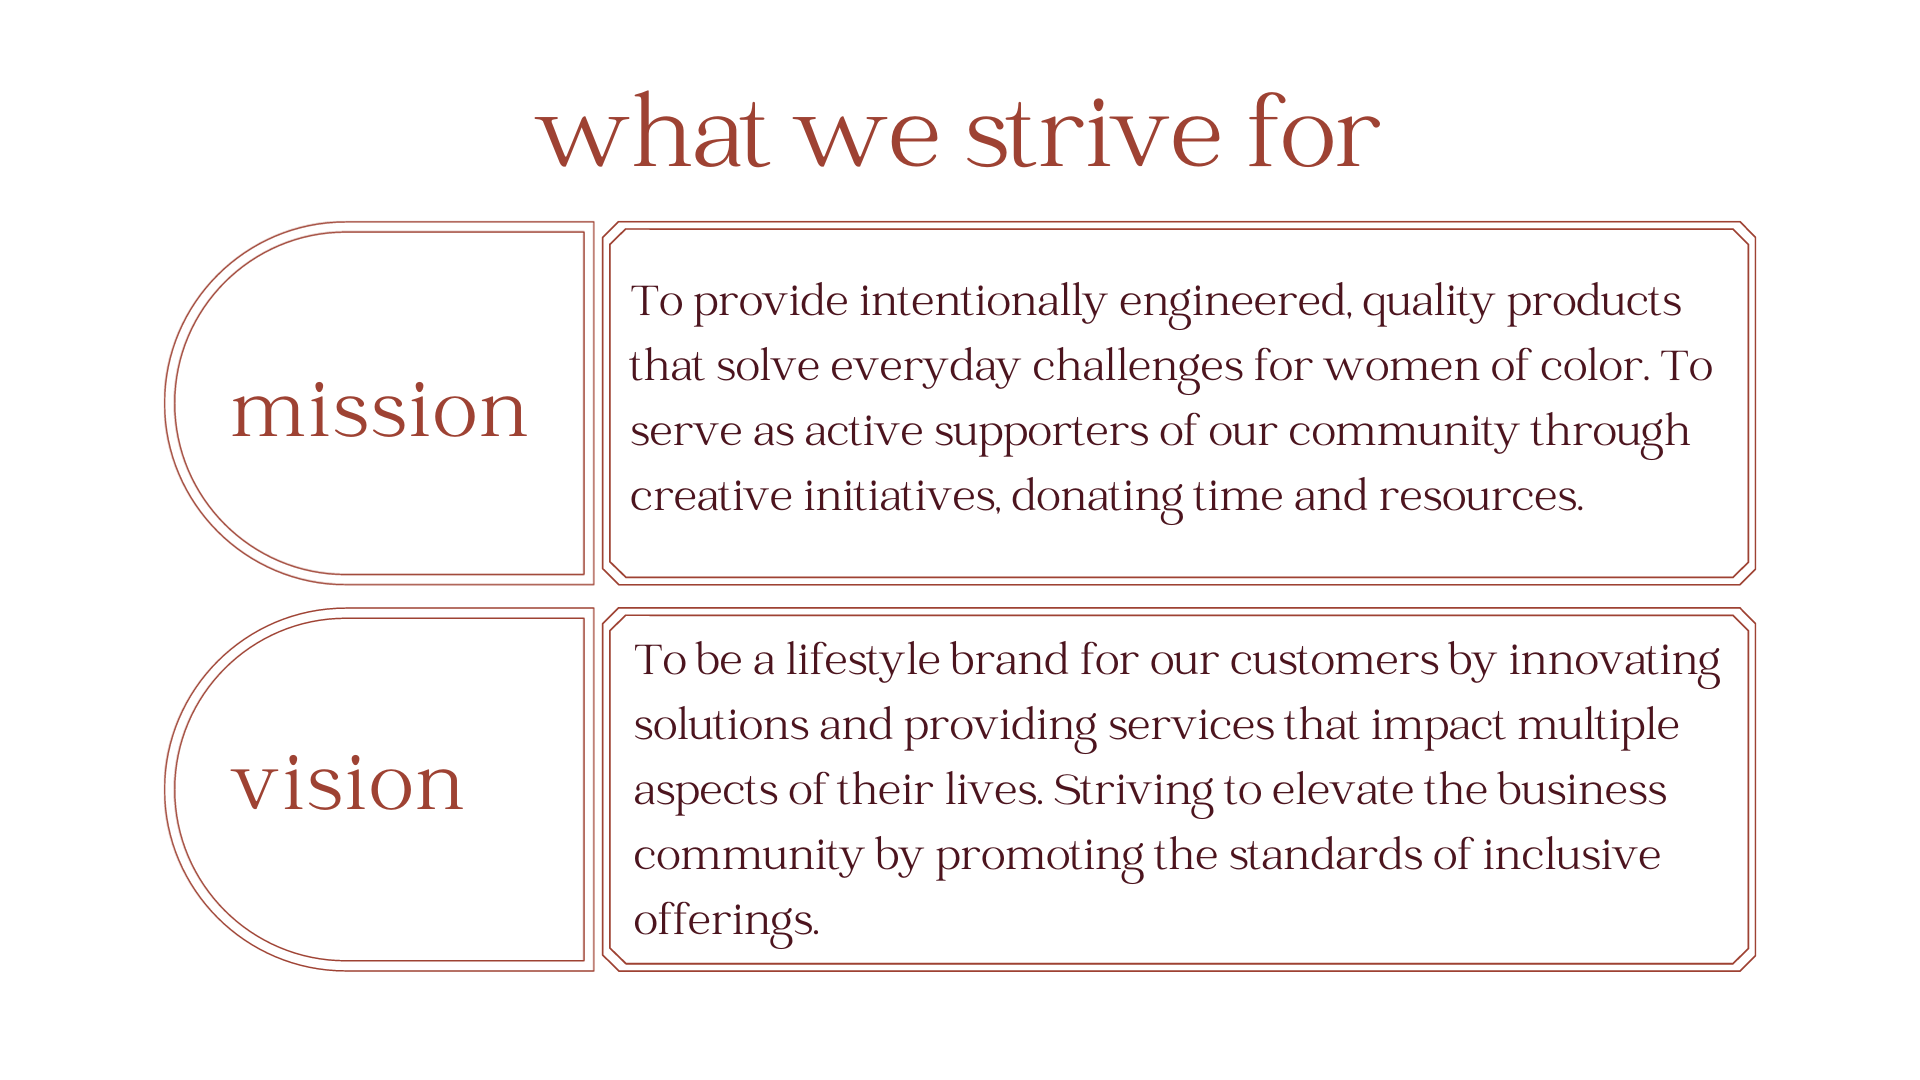 maibeauty's mission and vision statements